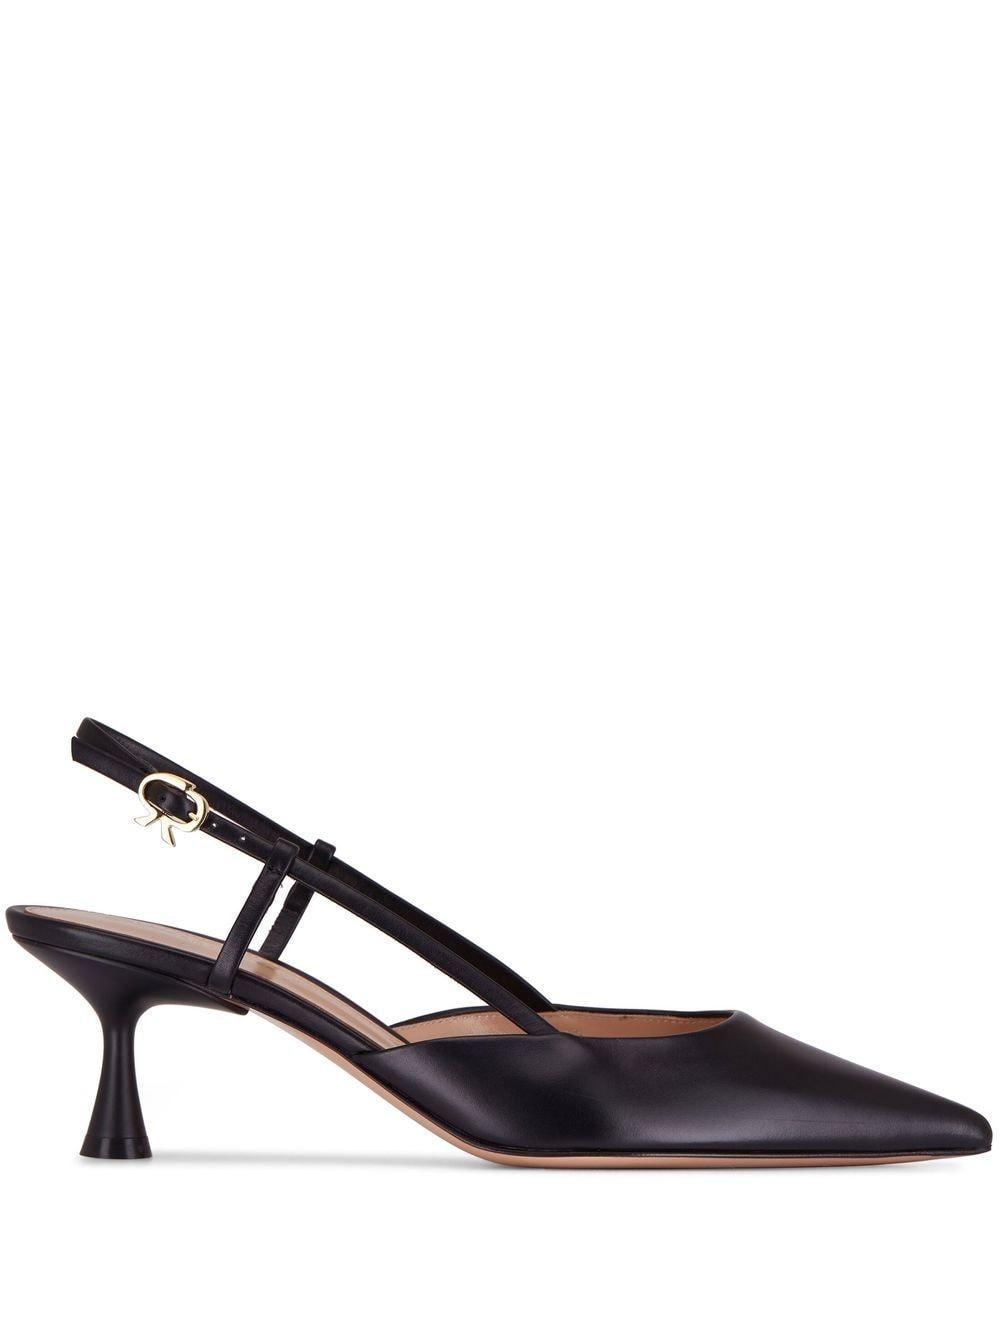 Gianvito Rossi Ascent Heeled Pumps in Black | Lyst